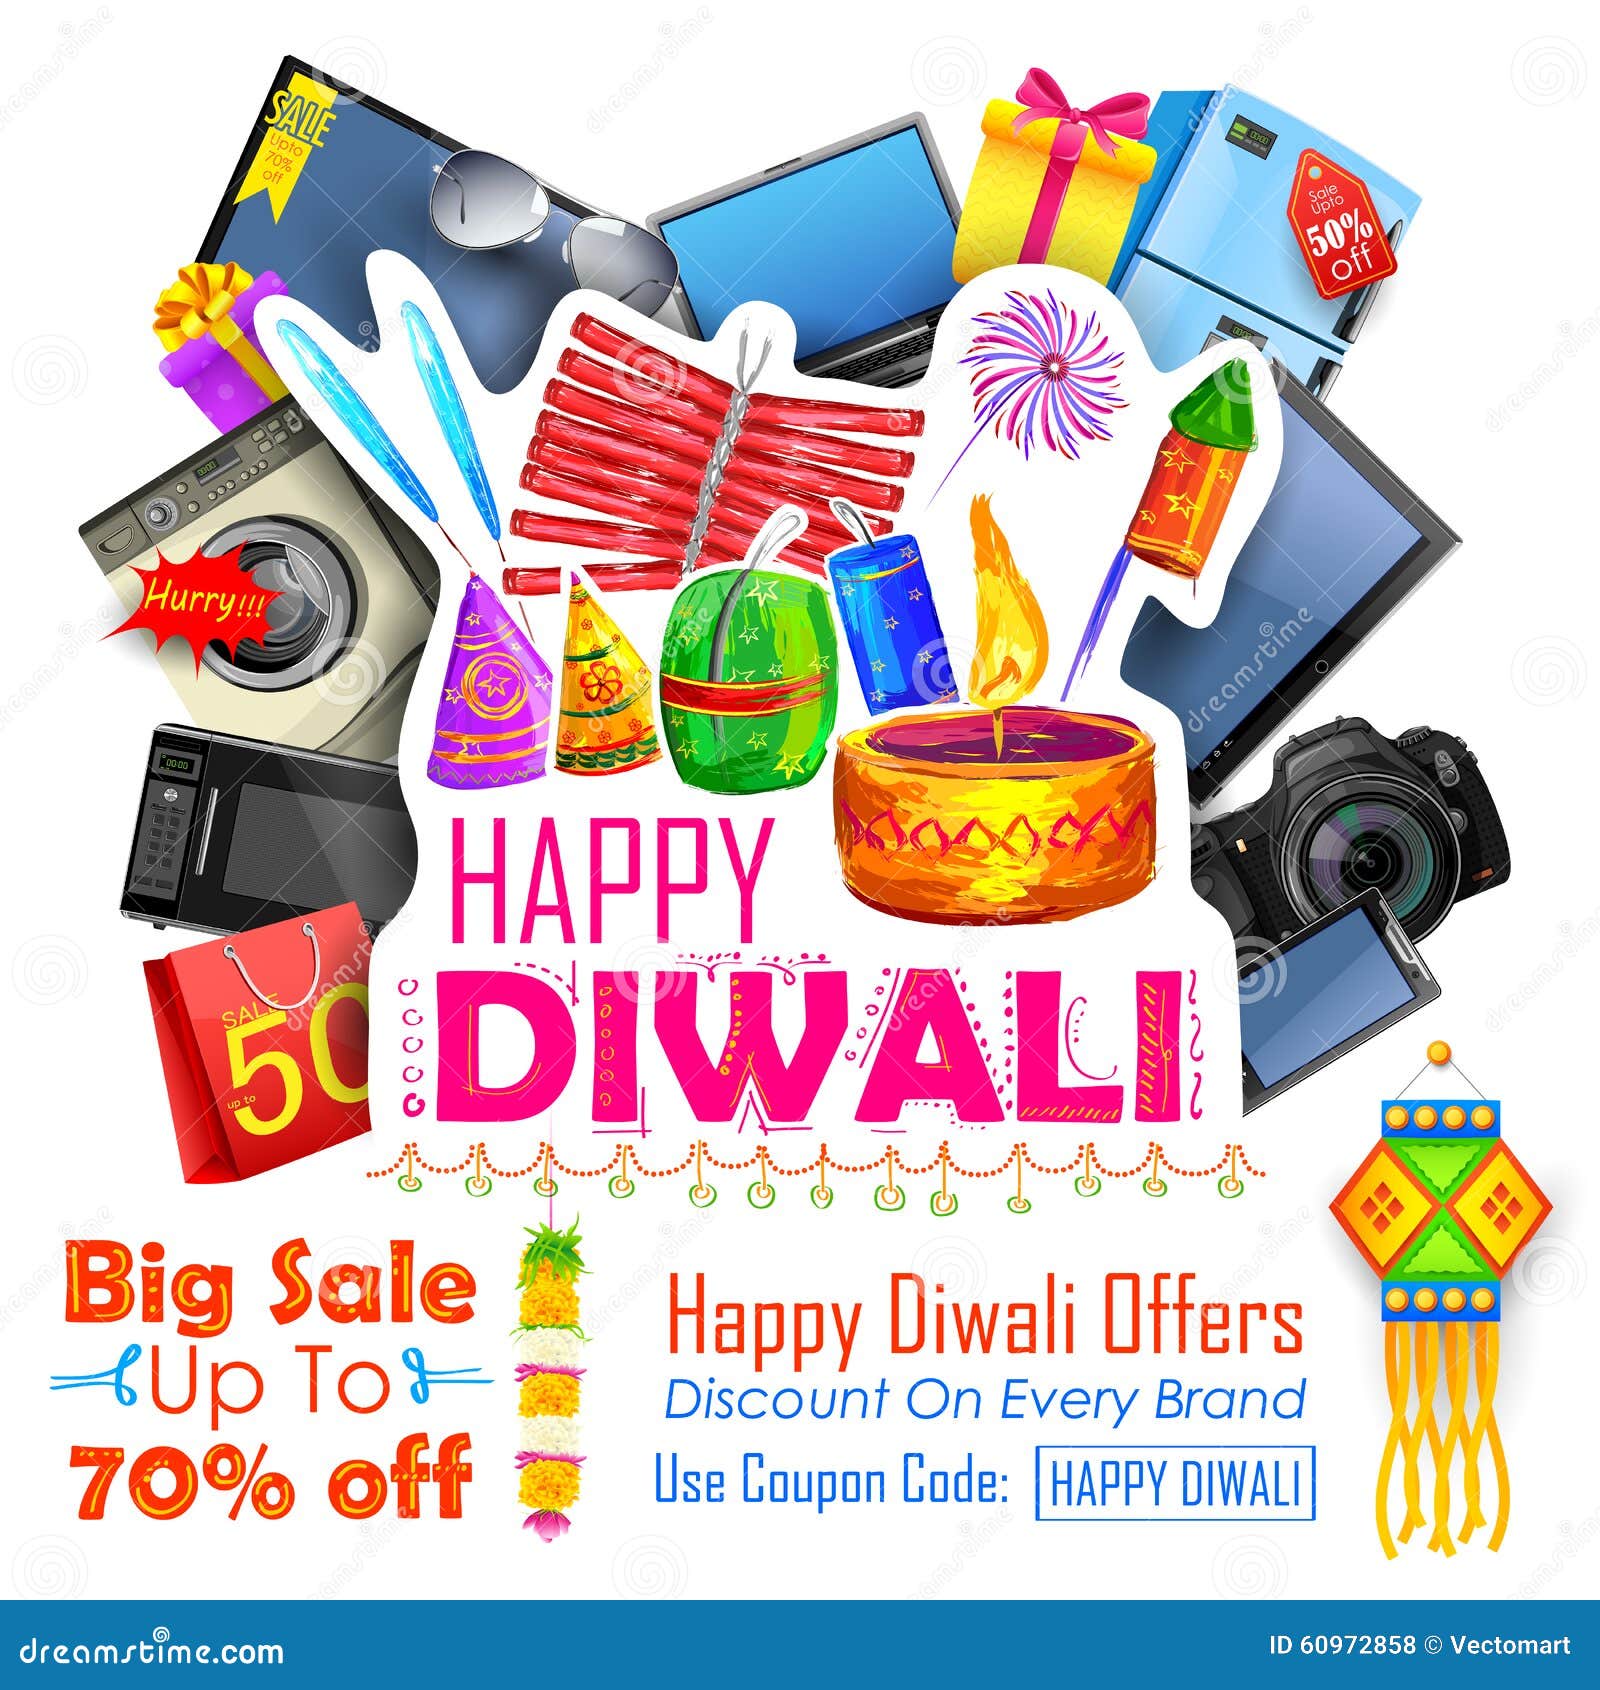 festive shopping offer for diwali holiday promotion and advertisment